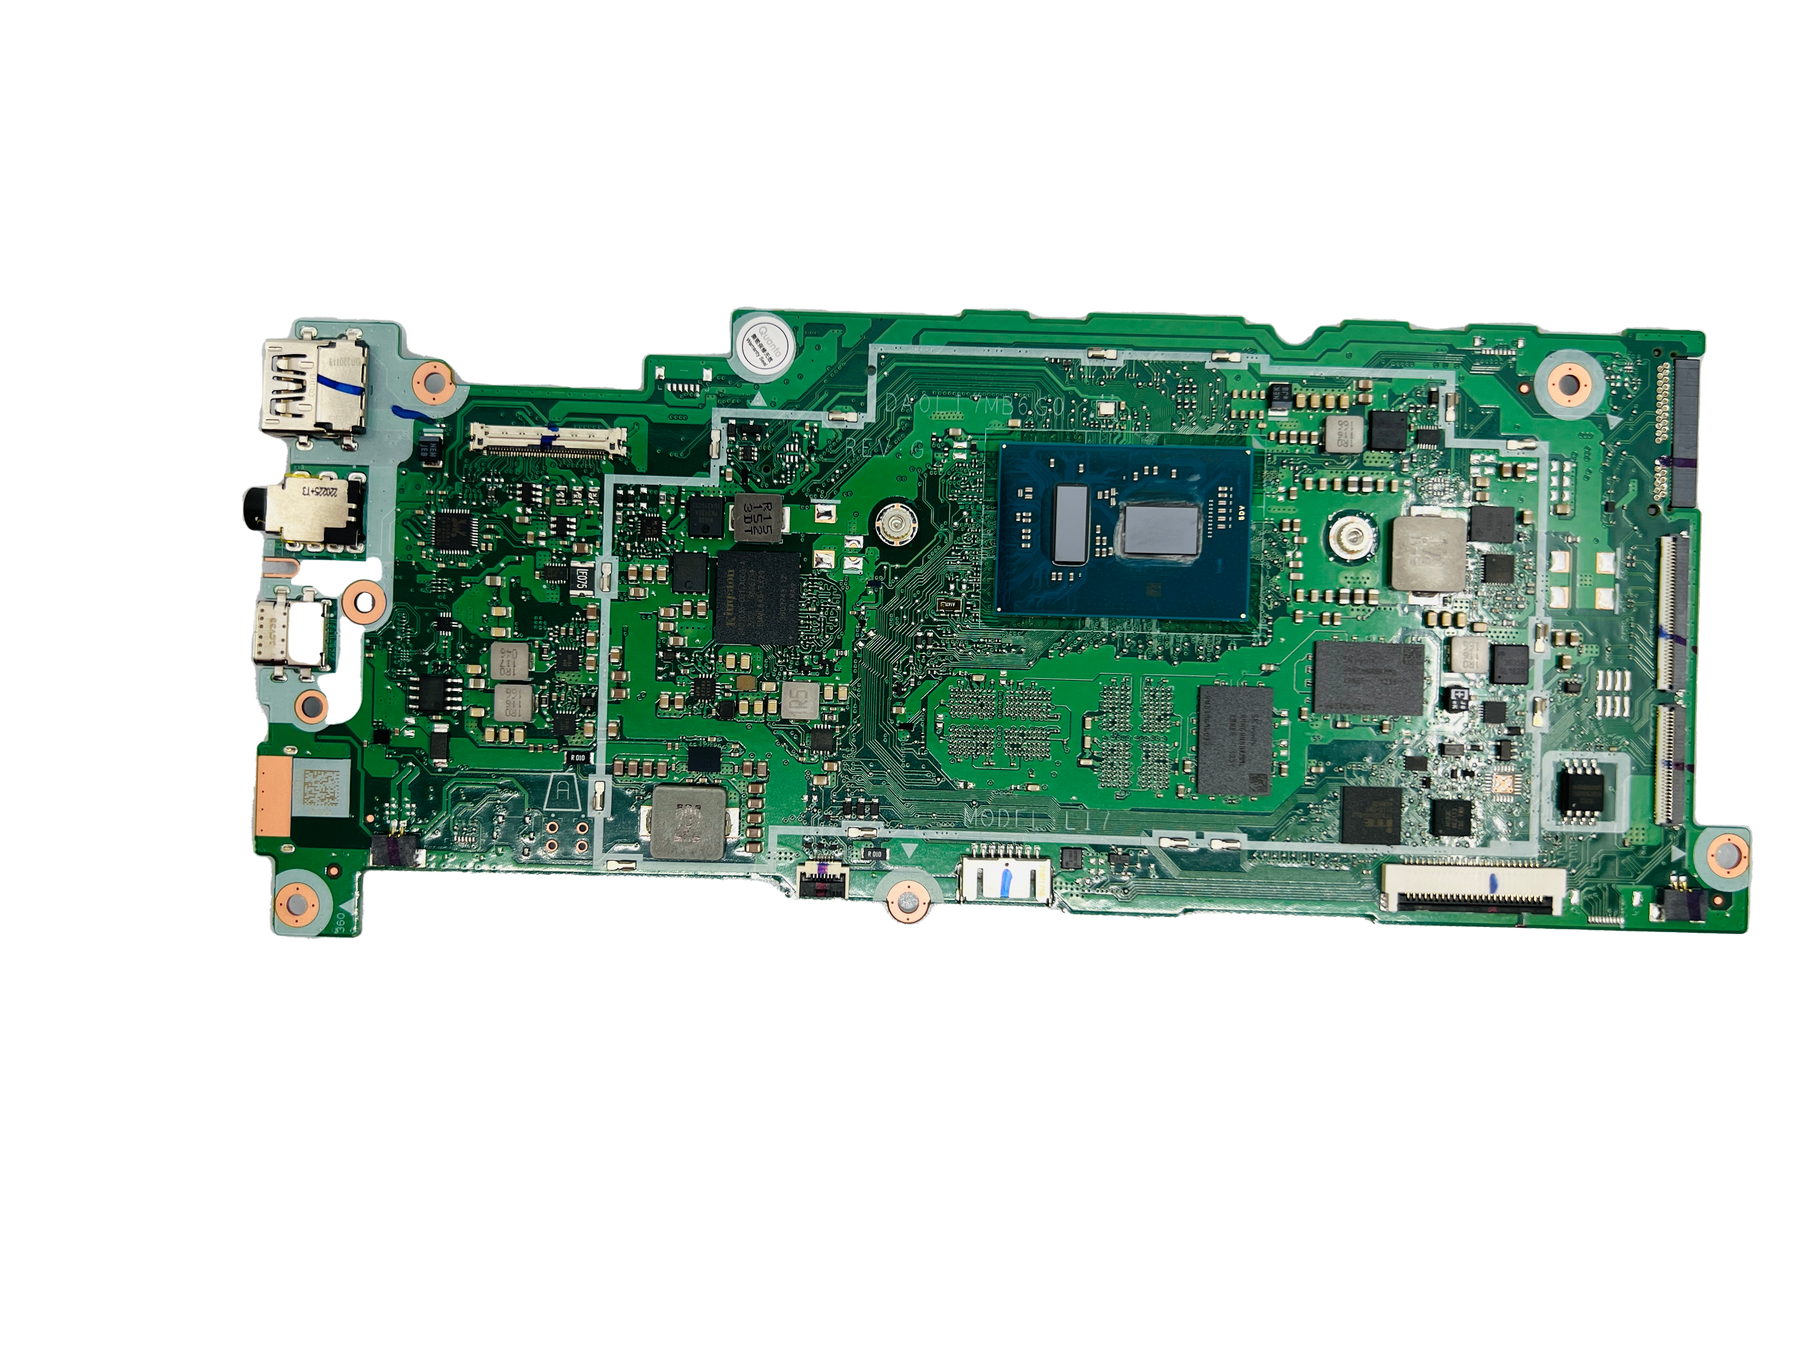 Renewed Replacement Mainboard for the CTL Chromebook NL72 (8/64)